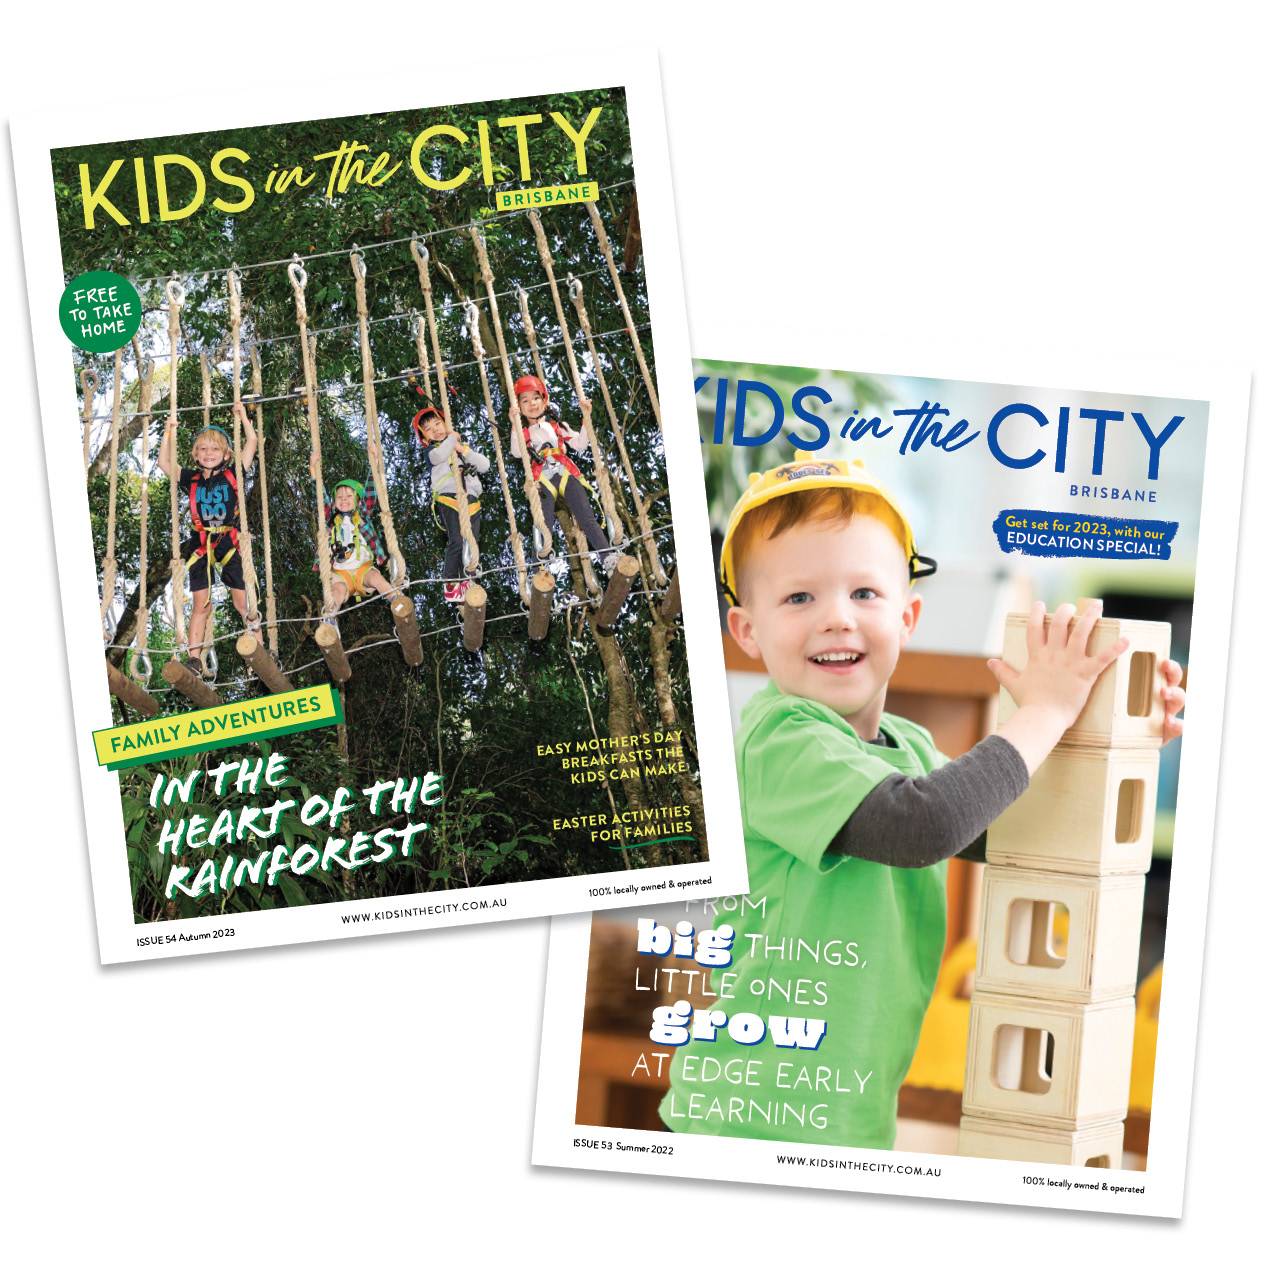 Kids in the City magazine covers in Brisbane